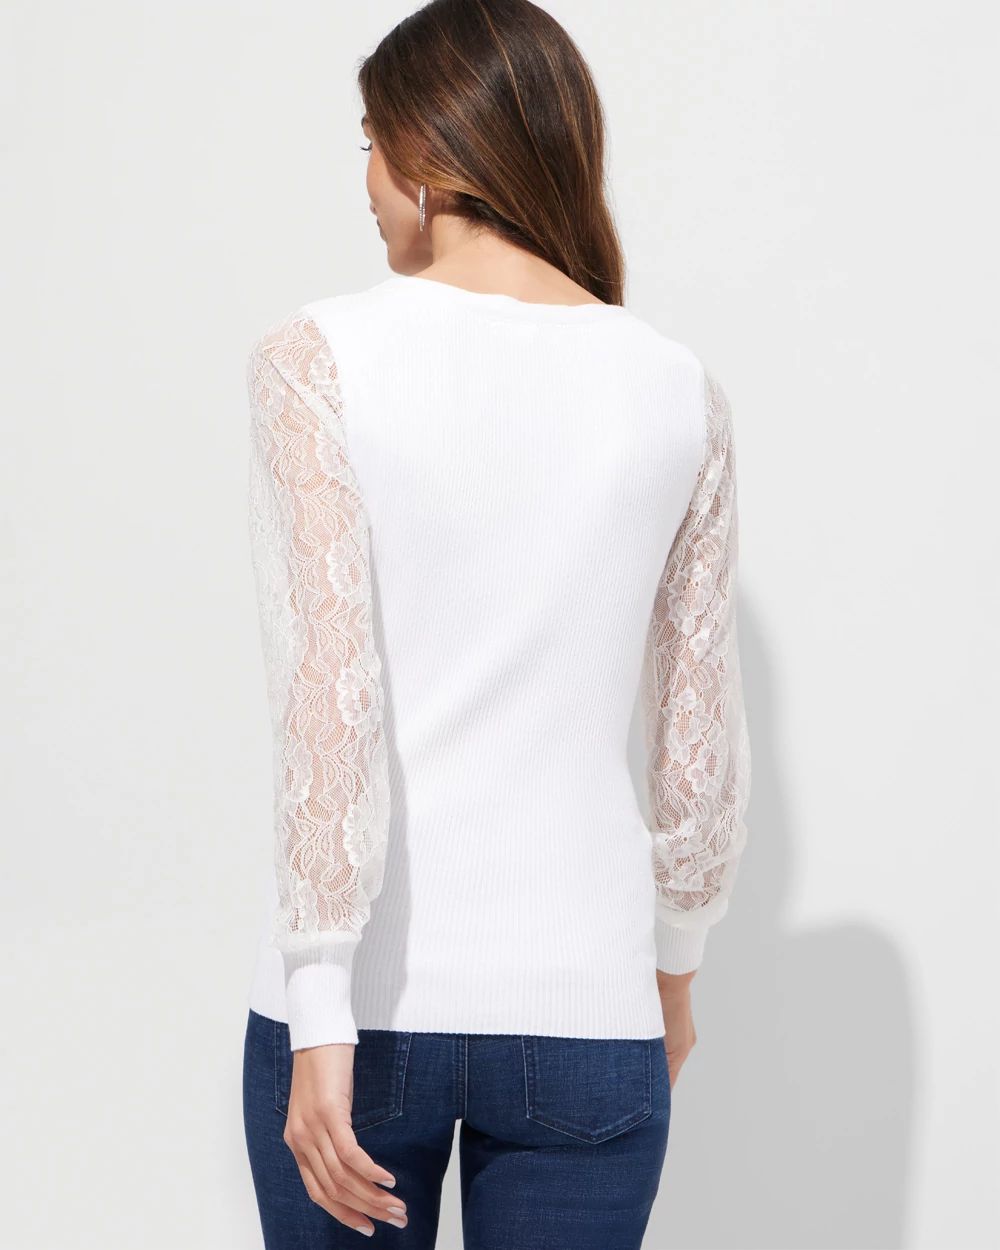 Outlet WHBM V-Neck Lace Sleeve Pullover click to view larger image.